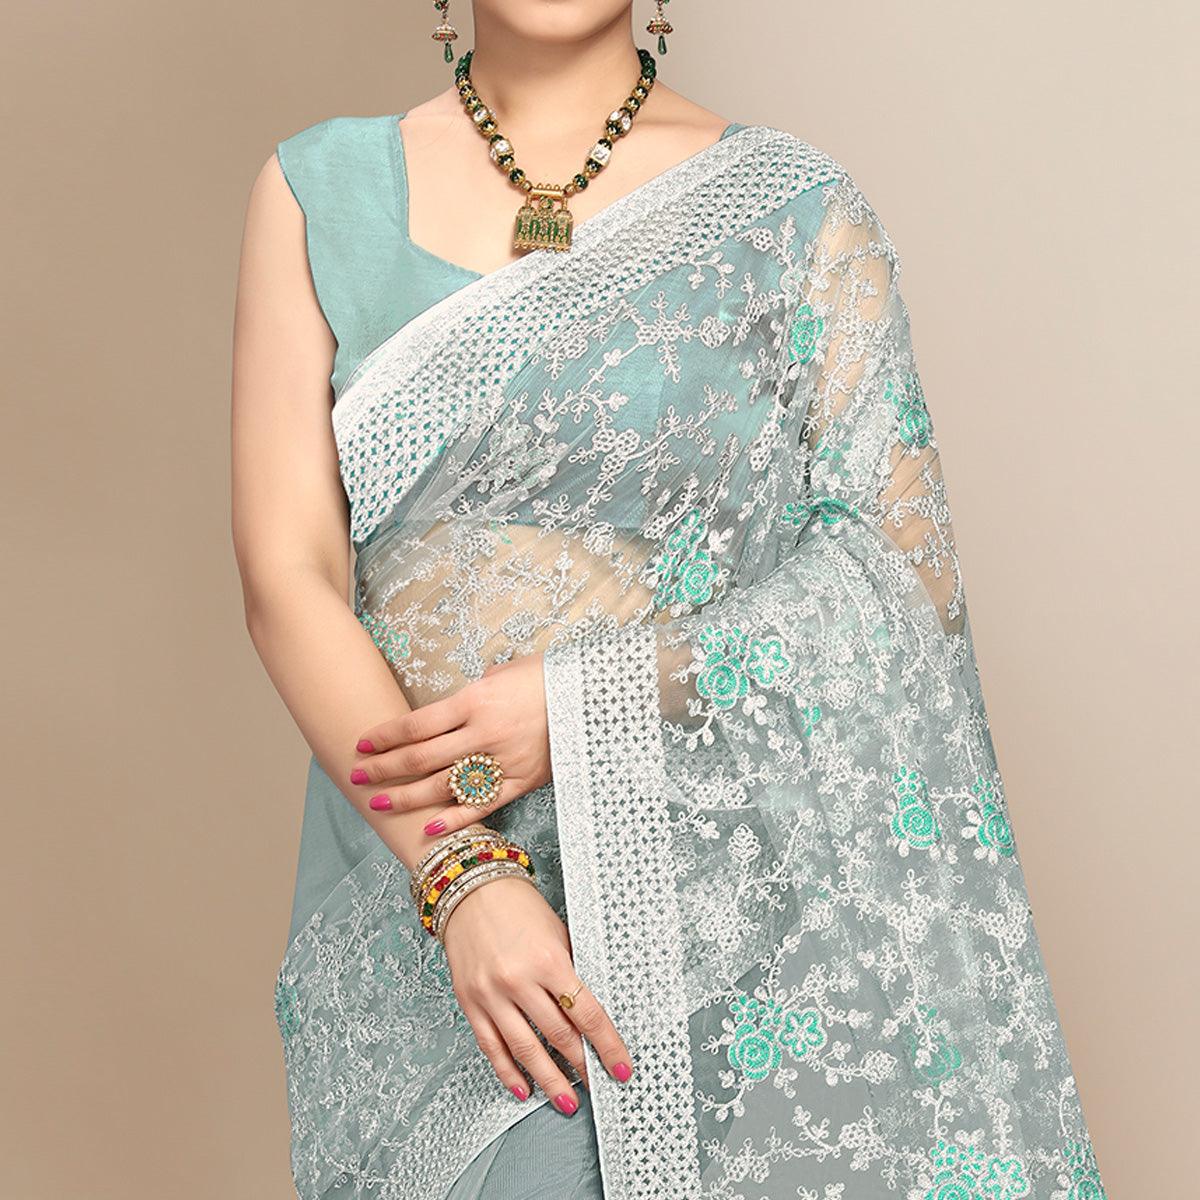 Blue Partywear Floral Embroidered Soft Net Saree - Peachmode